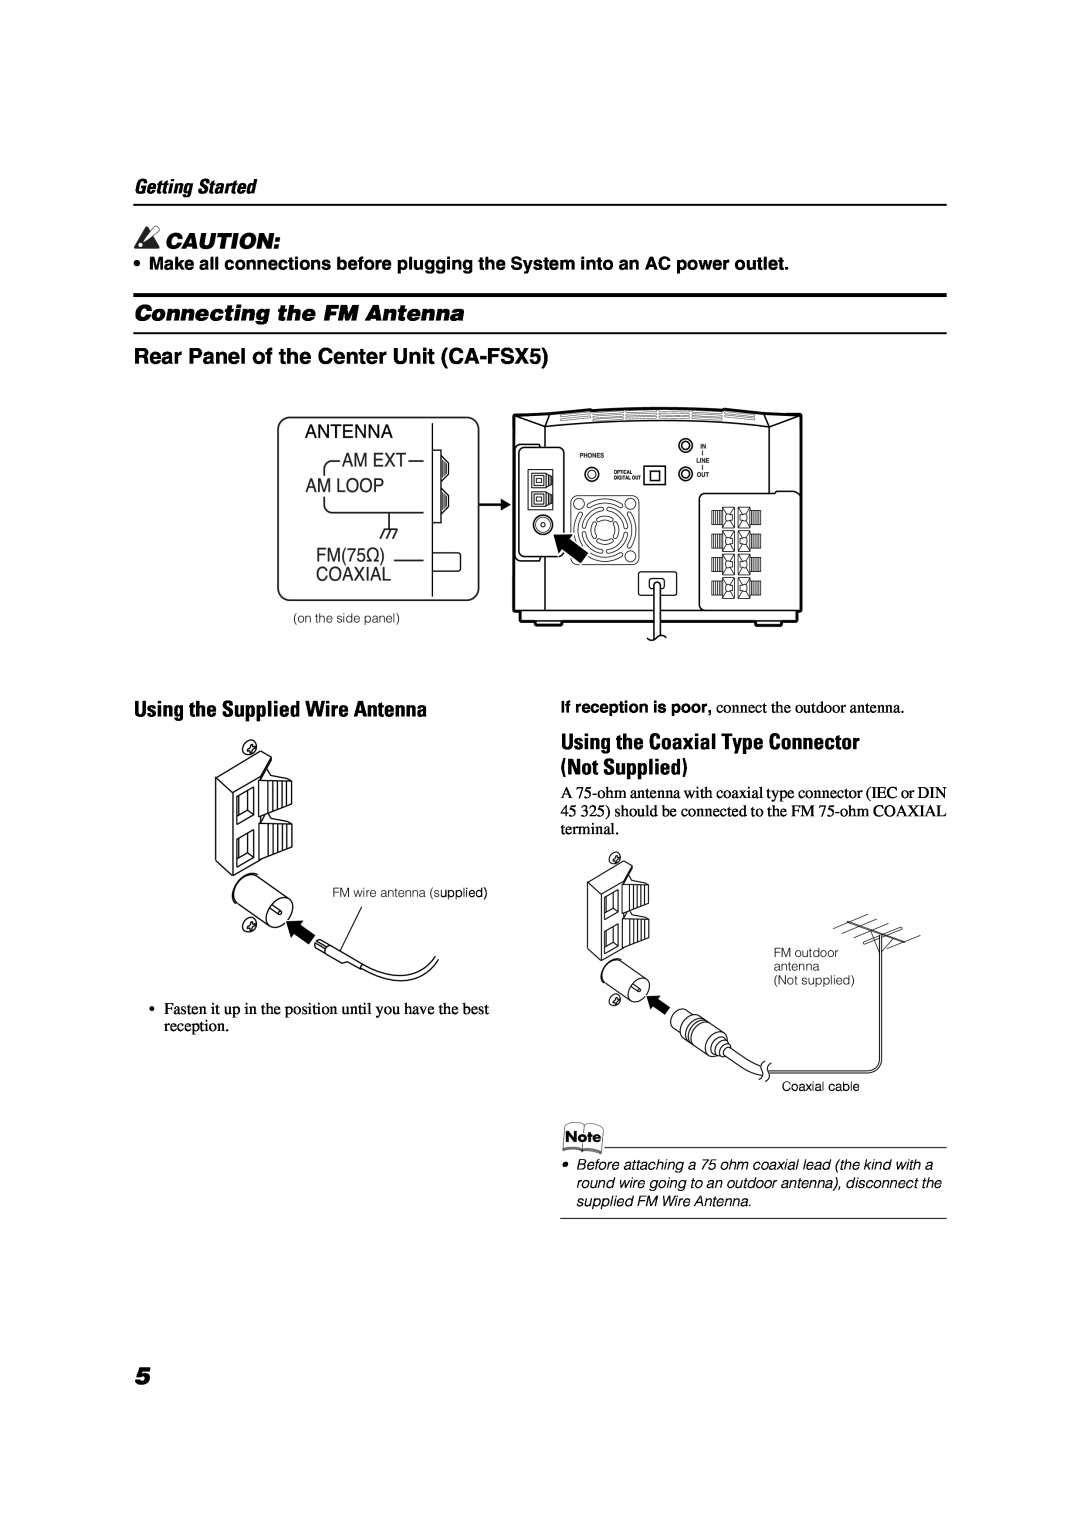 JVC LVT1041-002A manual Connecting the FM Antenna, Rear Panel of the Center Unit CA-FSX5, Using the Supplied Wire Antenna 